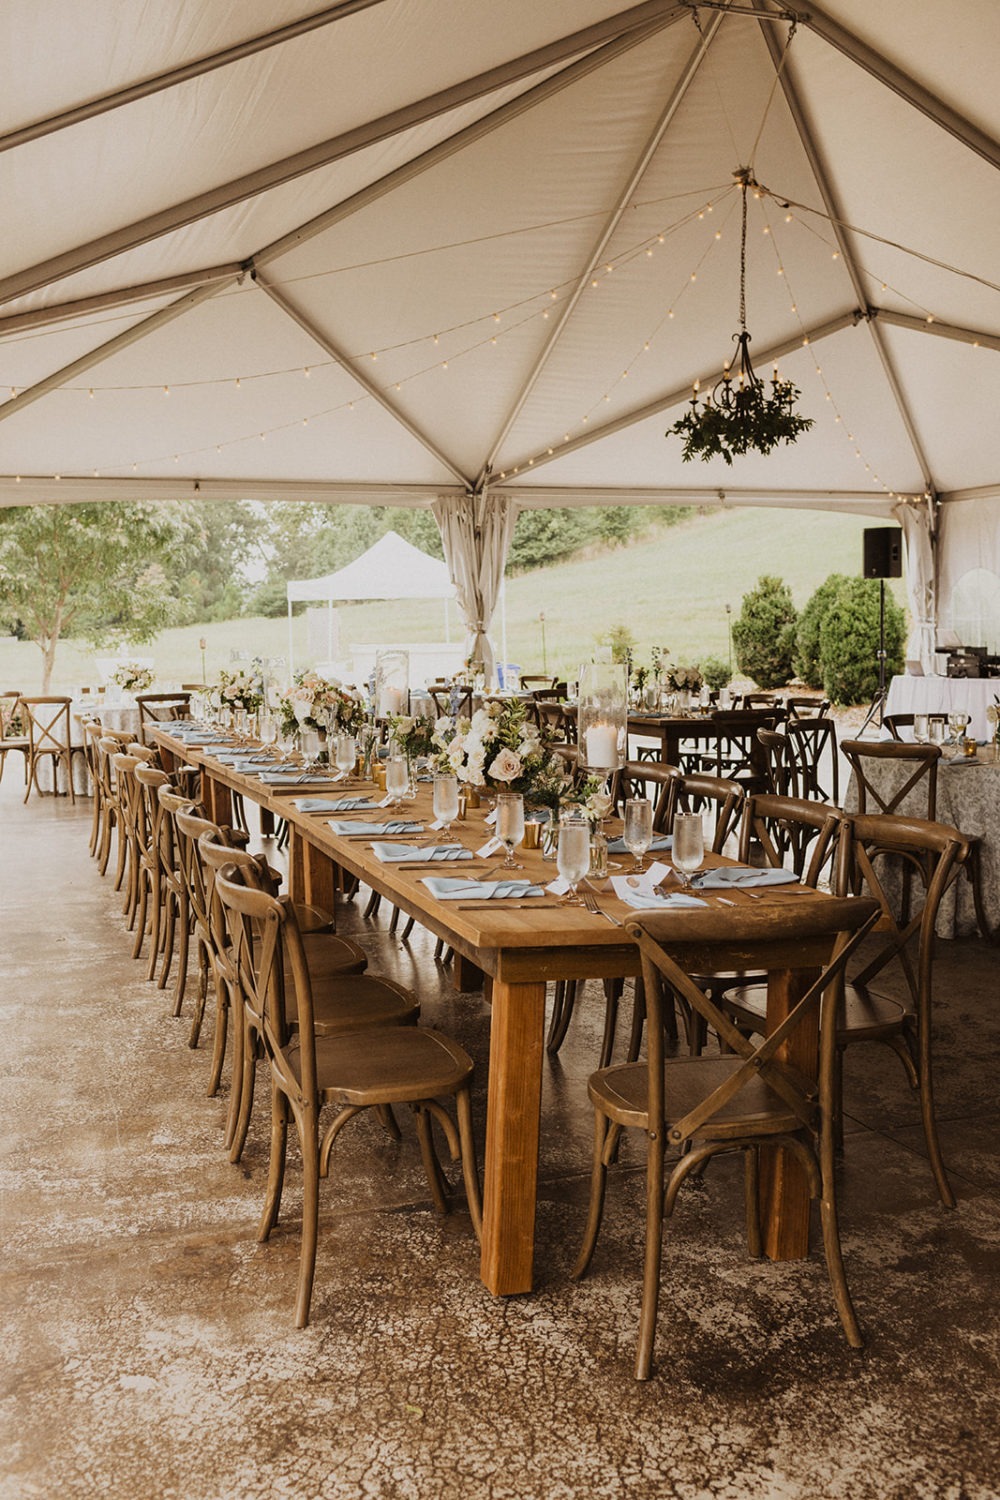 floral decor at tented wedding reception